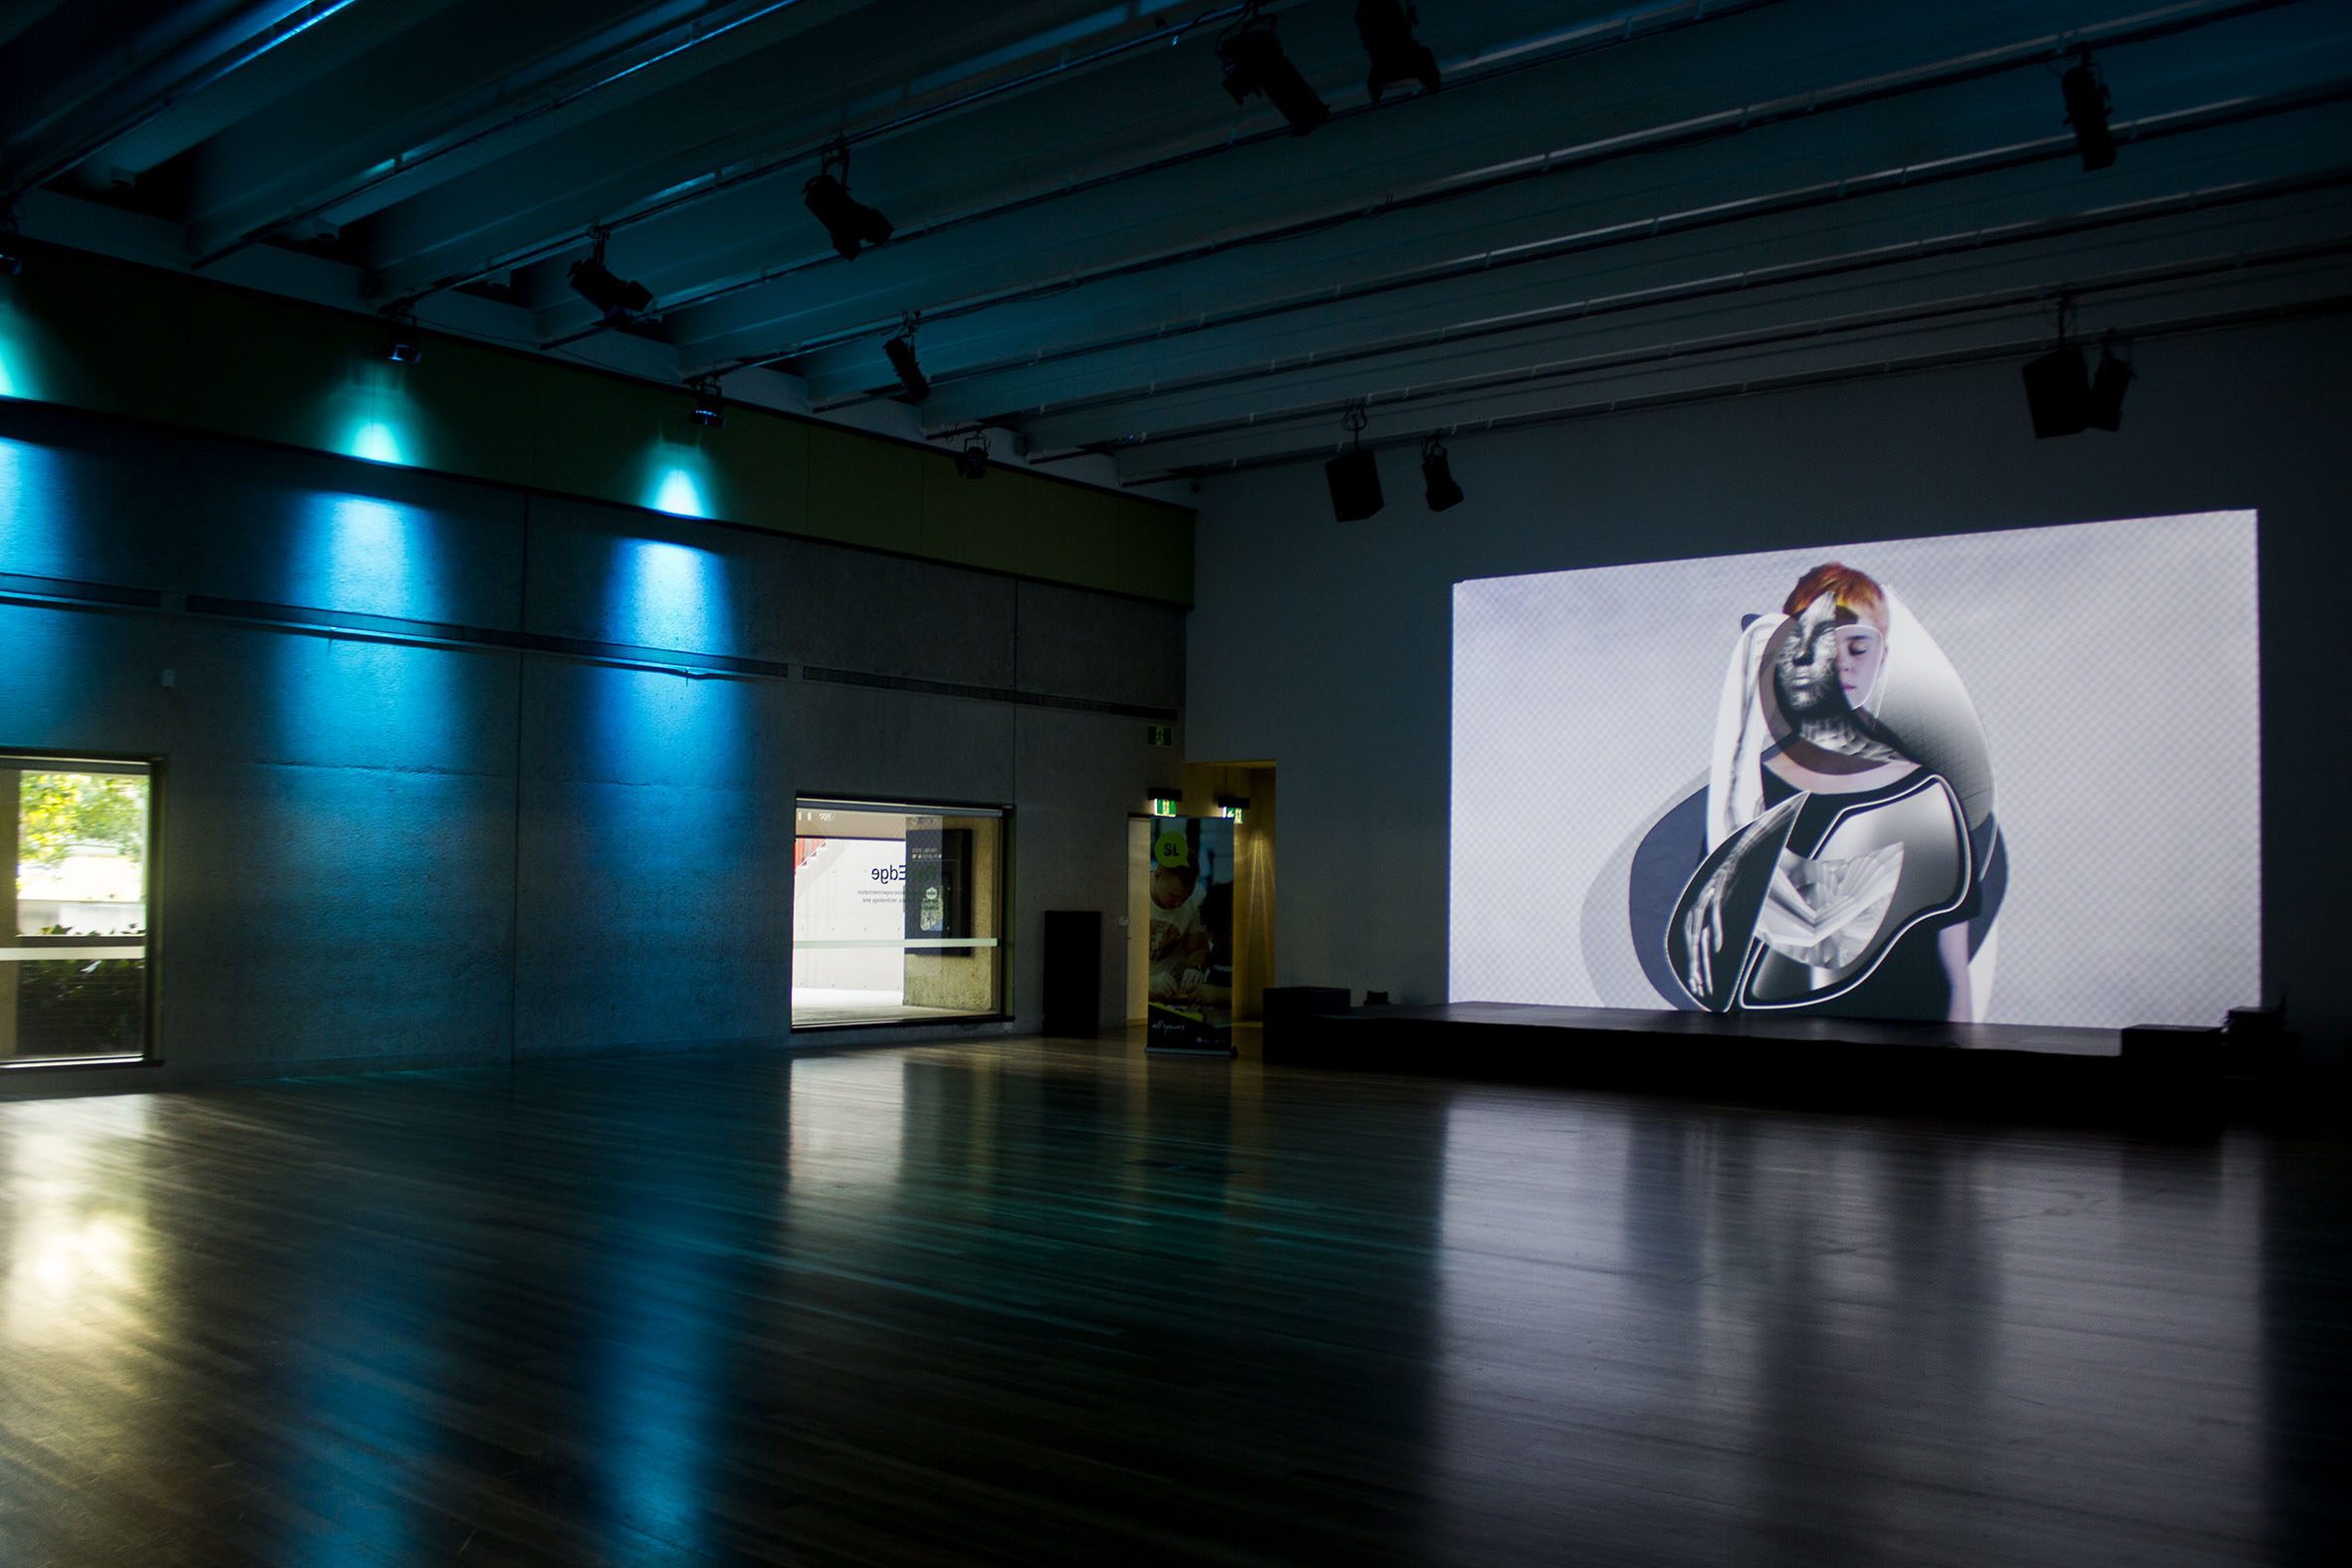   Mesh  projection installation at The Edge, State Library of Queensland auditorium in 2016 